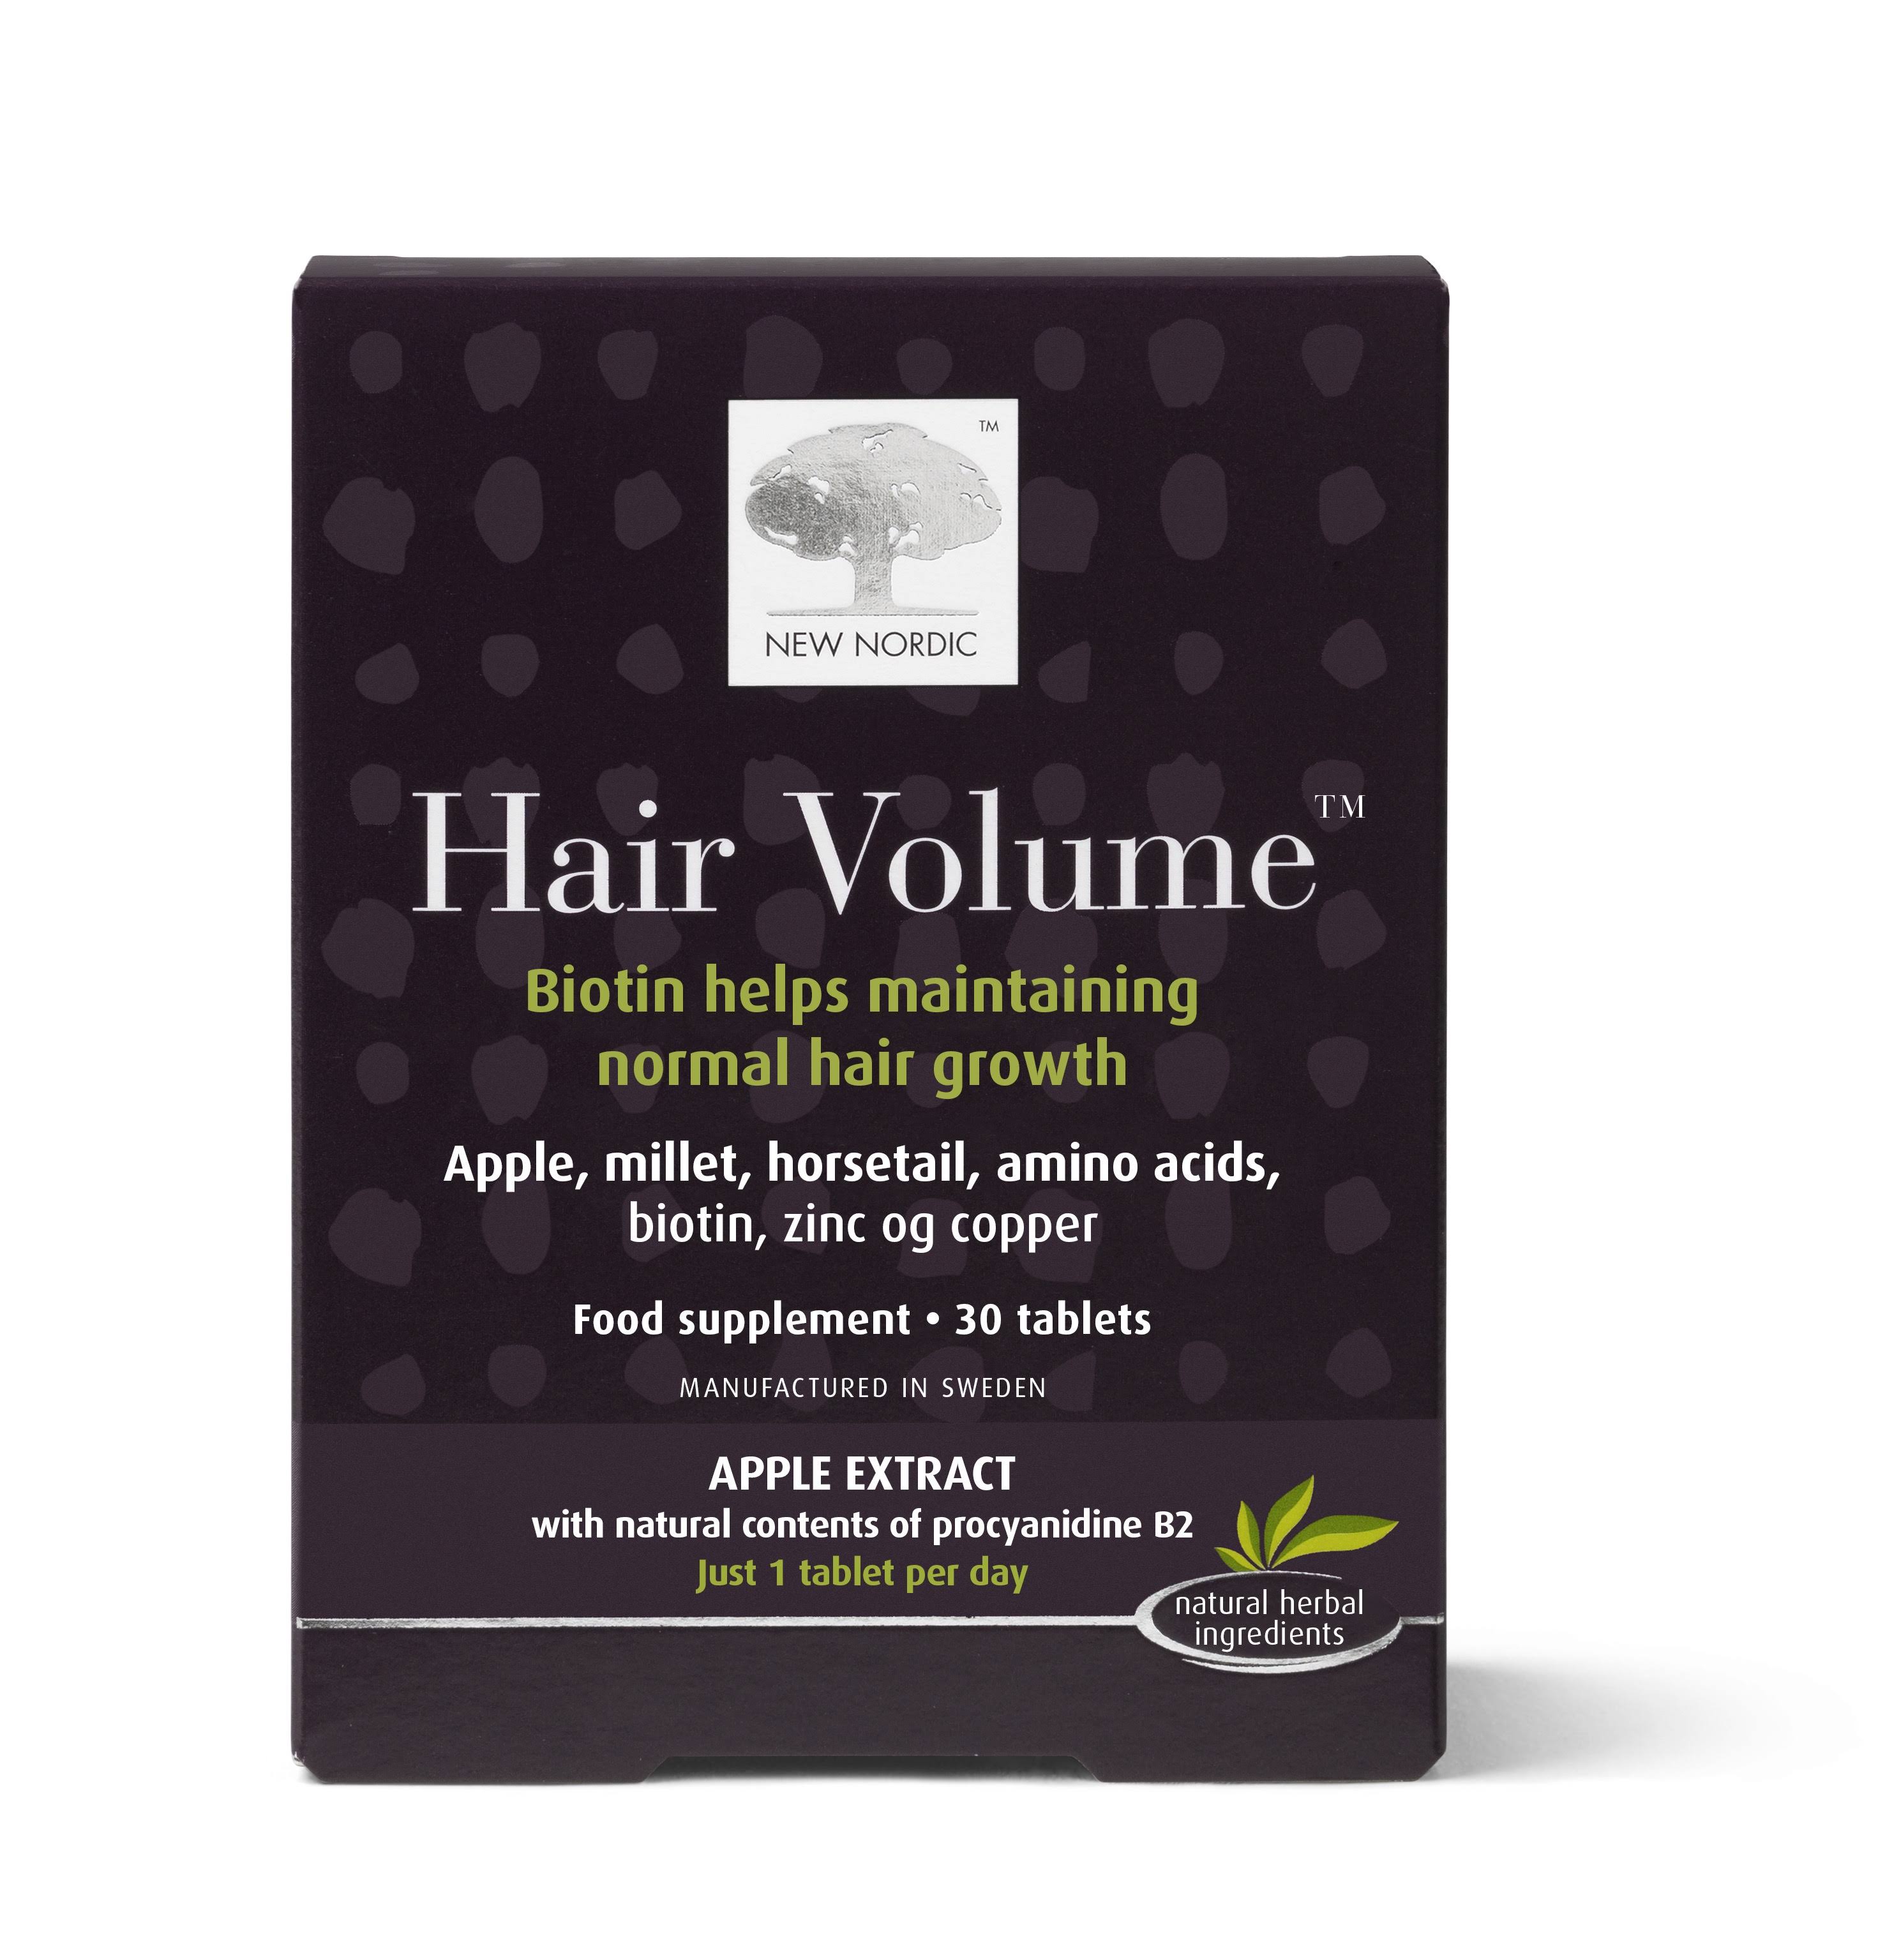 New Nordic Hair Volume Food Supplement Tablets - 30ct